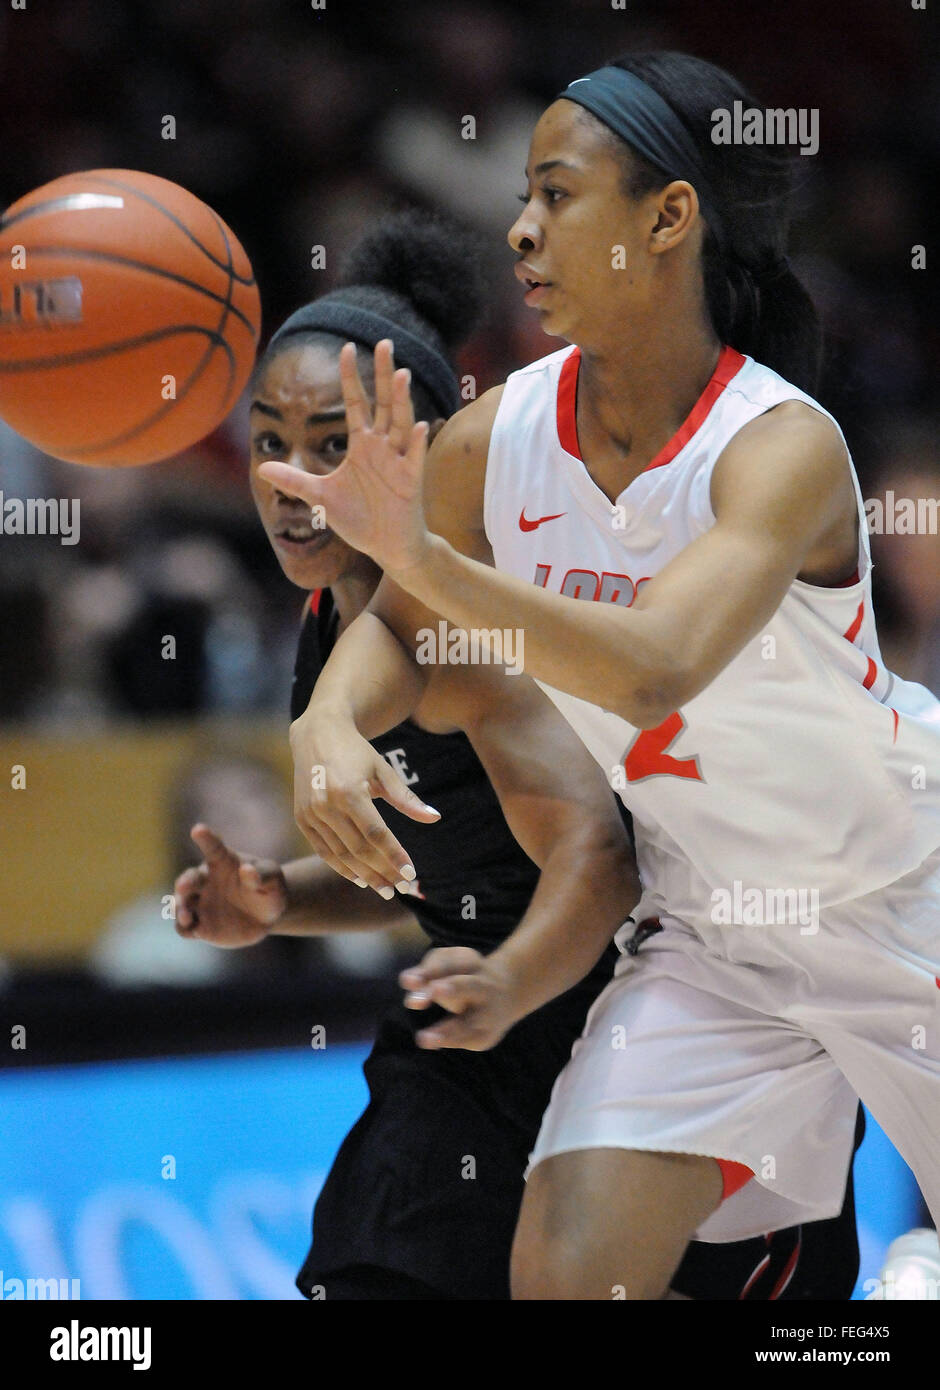 Albuquerque, NM, USA. 6th Feb, 2016. UNM's #2 Kenya Pye brings the ball down court with San Diego's # 3 Ariell Bostick by her side. Saturday, Feb. 06, 2016. © Jim Thompson/Albuquerque Journal/ZUMA Wire/Alamy Live News Stock Photo